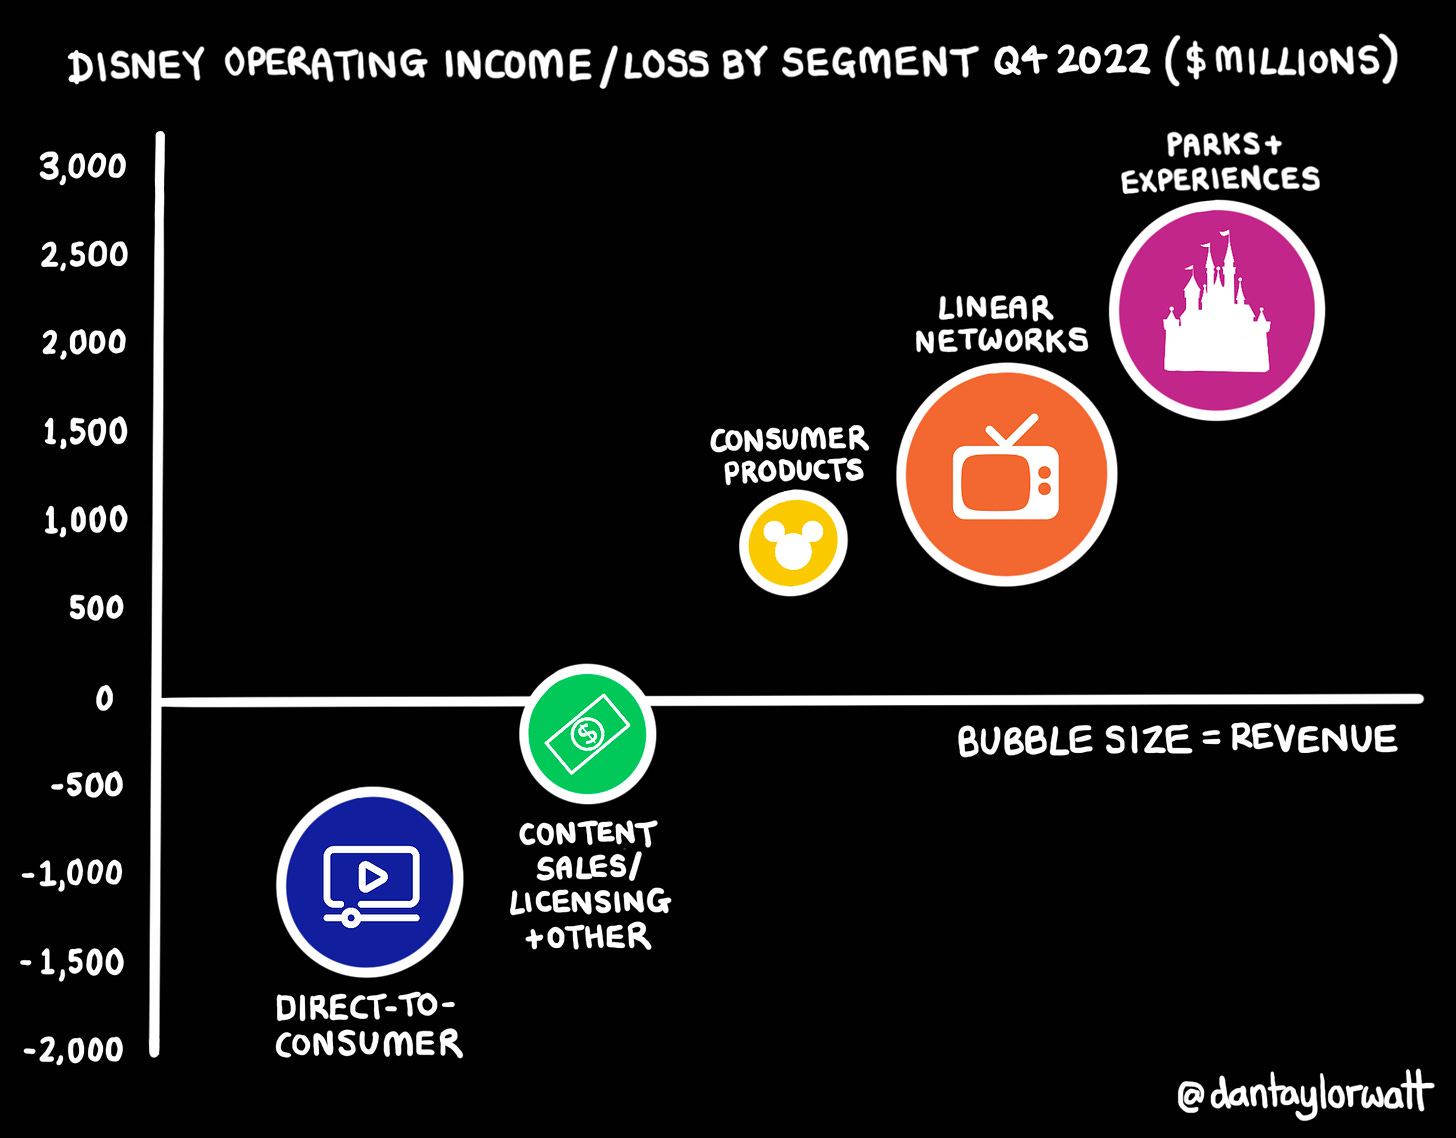 Bubble chart showing Disney operating income/loss by segment in Q4 2022